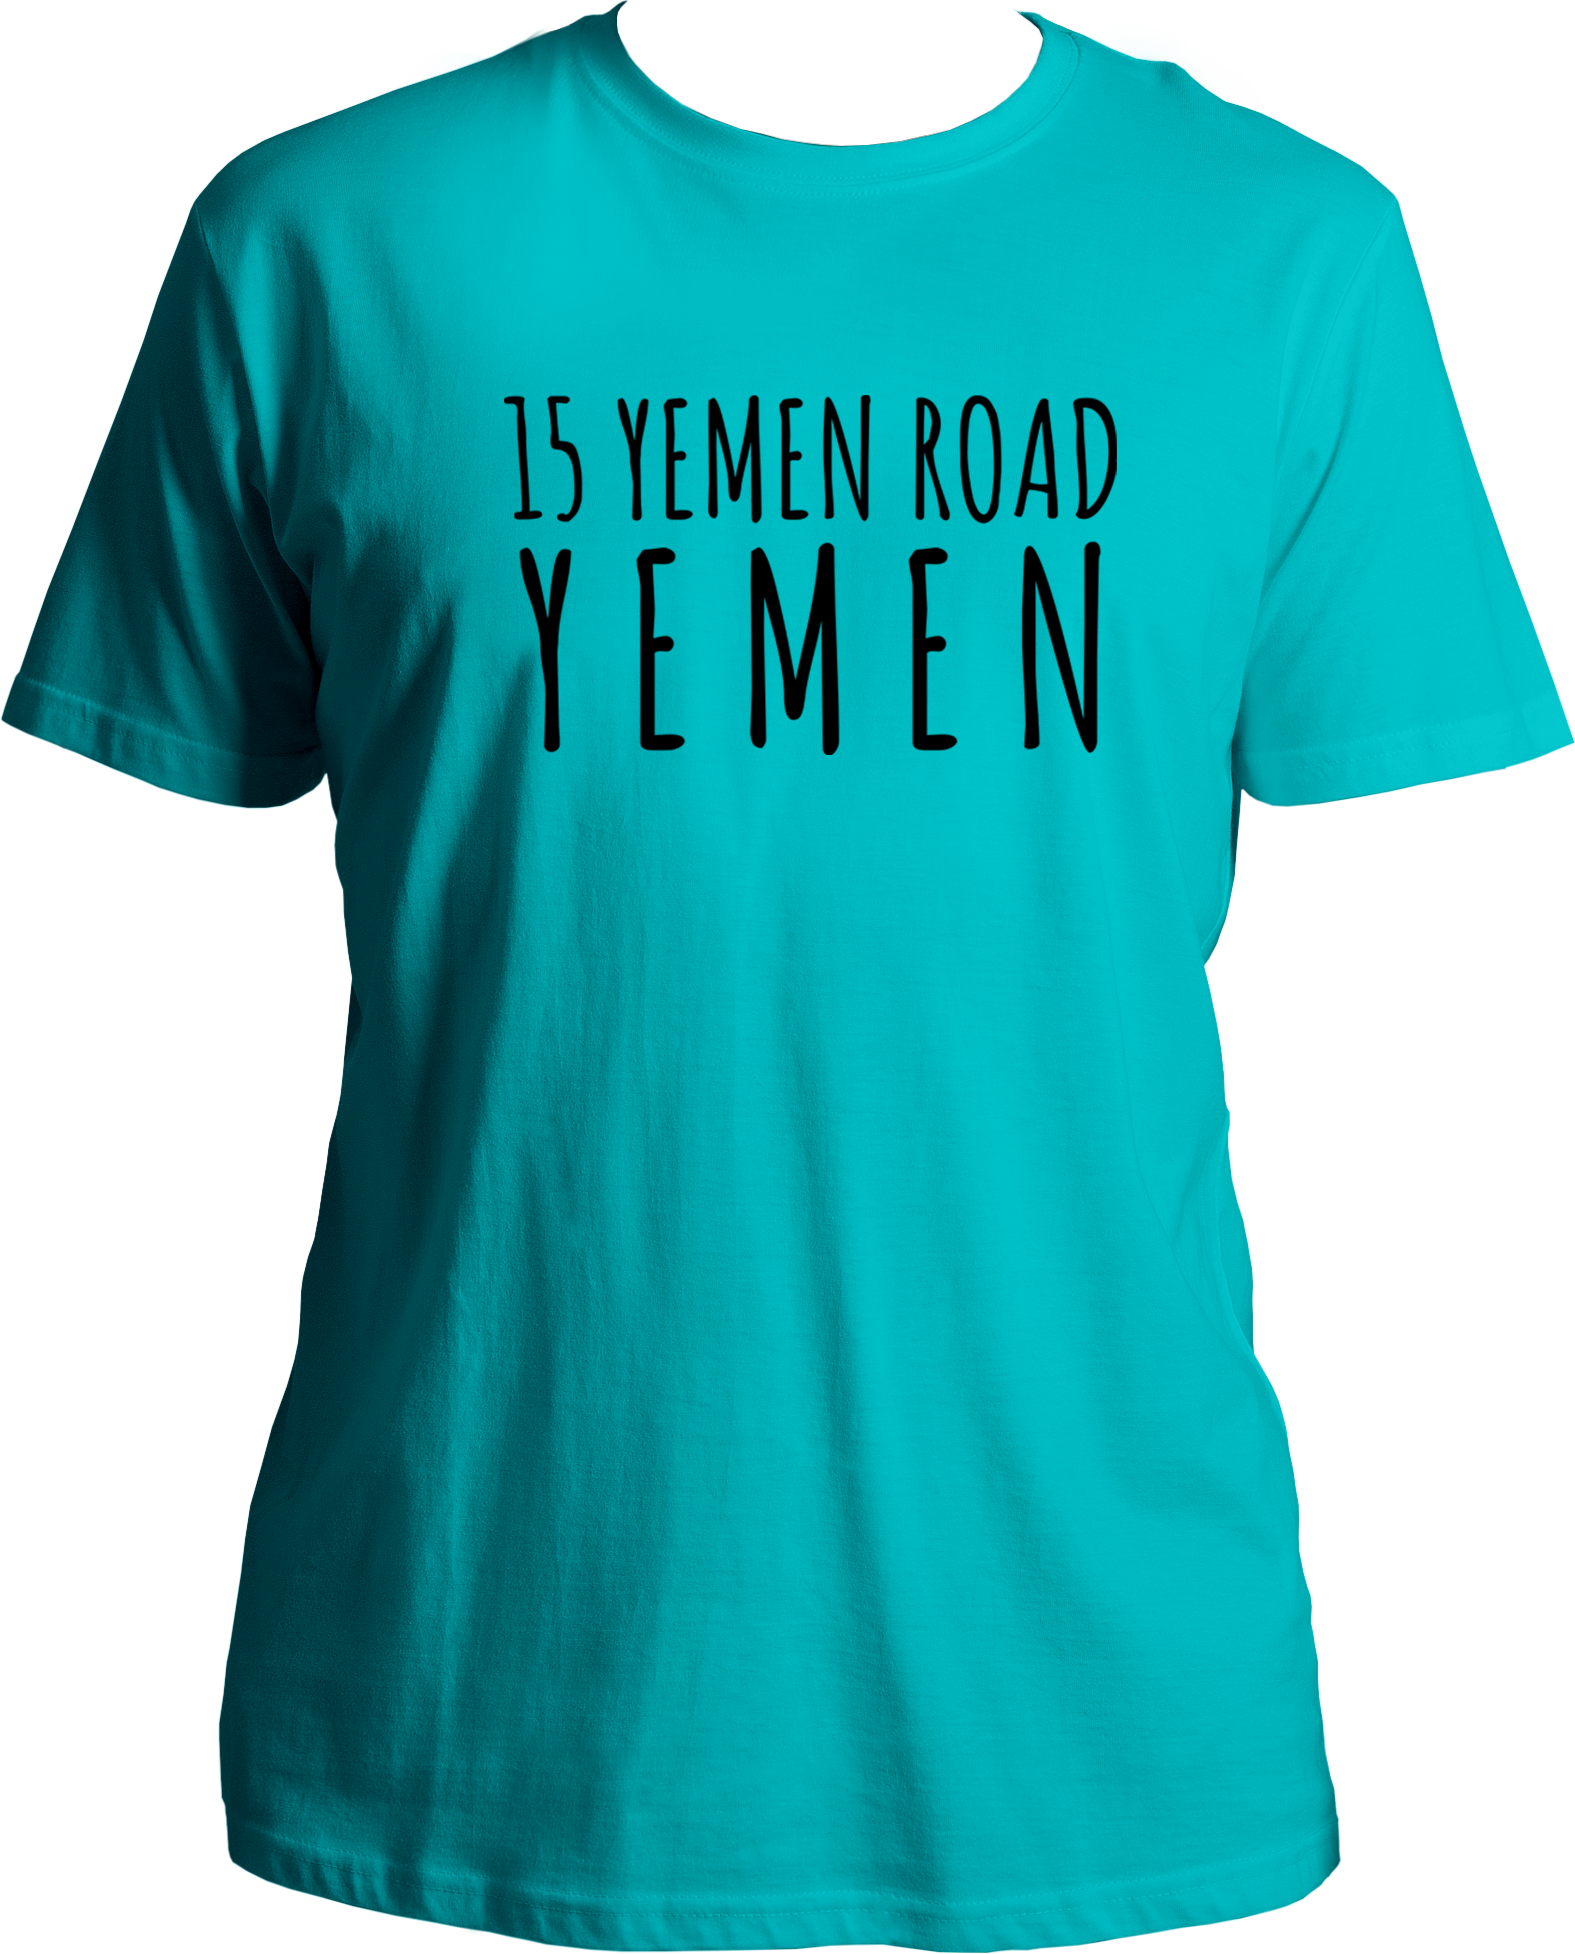 Welcome to our T-shirt haven, where nostalgia meets style! Introducing our Round Neck T-shirt under the TV Shows category, paying homage to the iconic sitcom, F.R.I.E.N.D.S. Get ready to relive the laughter with our "15 Yemen Road Yemen" tee, inspired by that hilarious Chandler moment that still has fans in stitches.